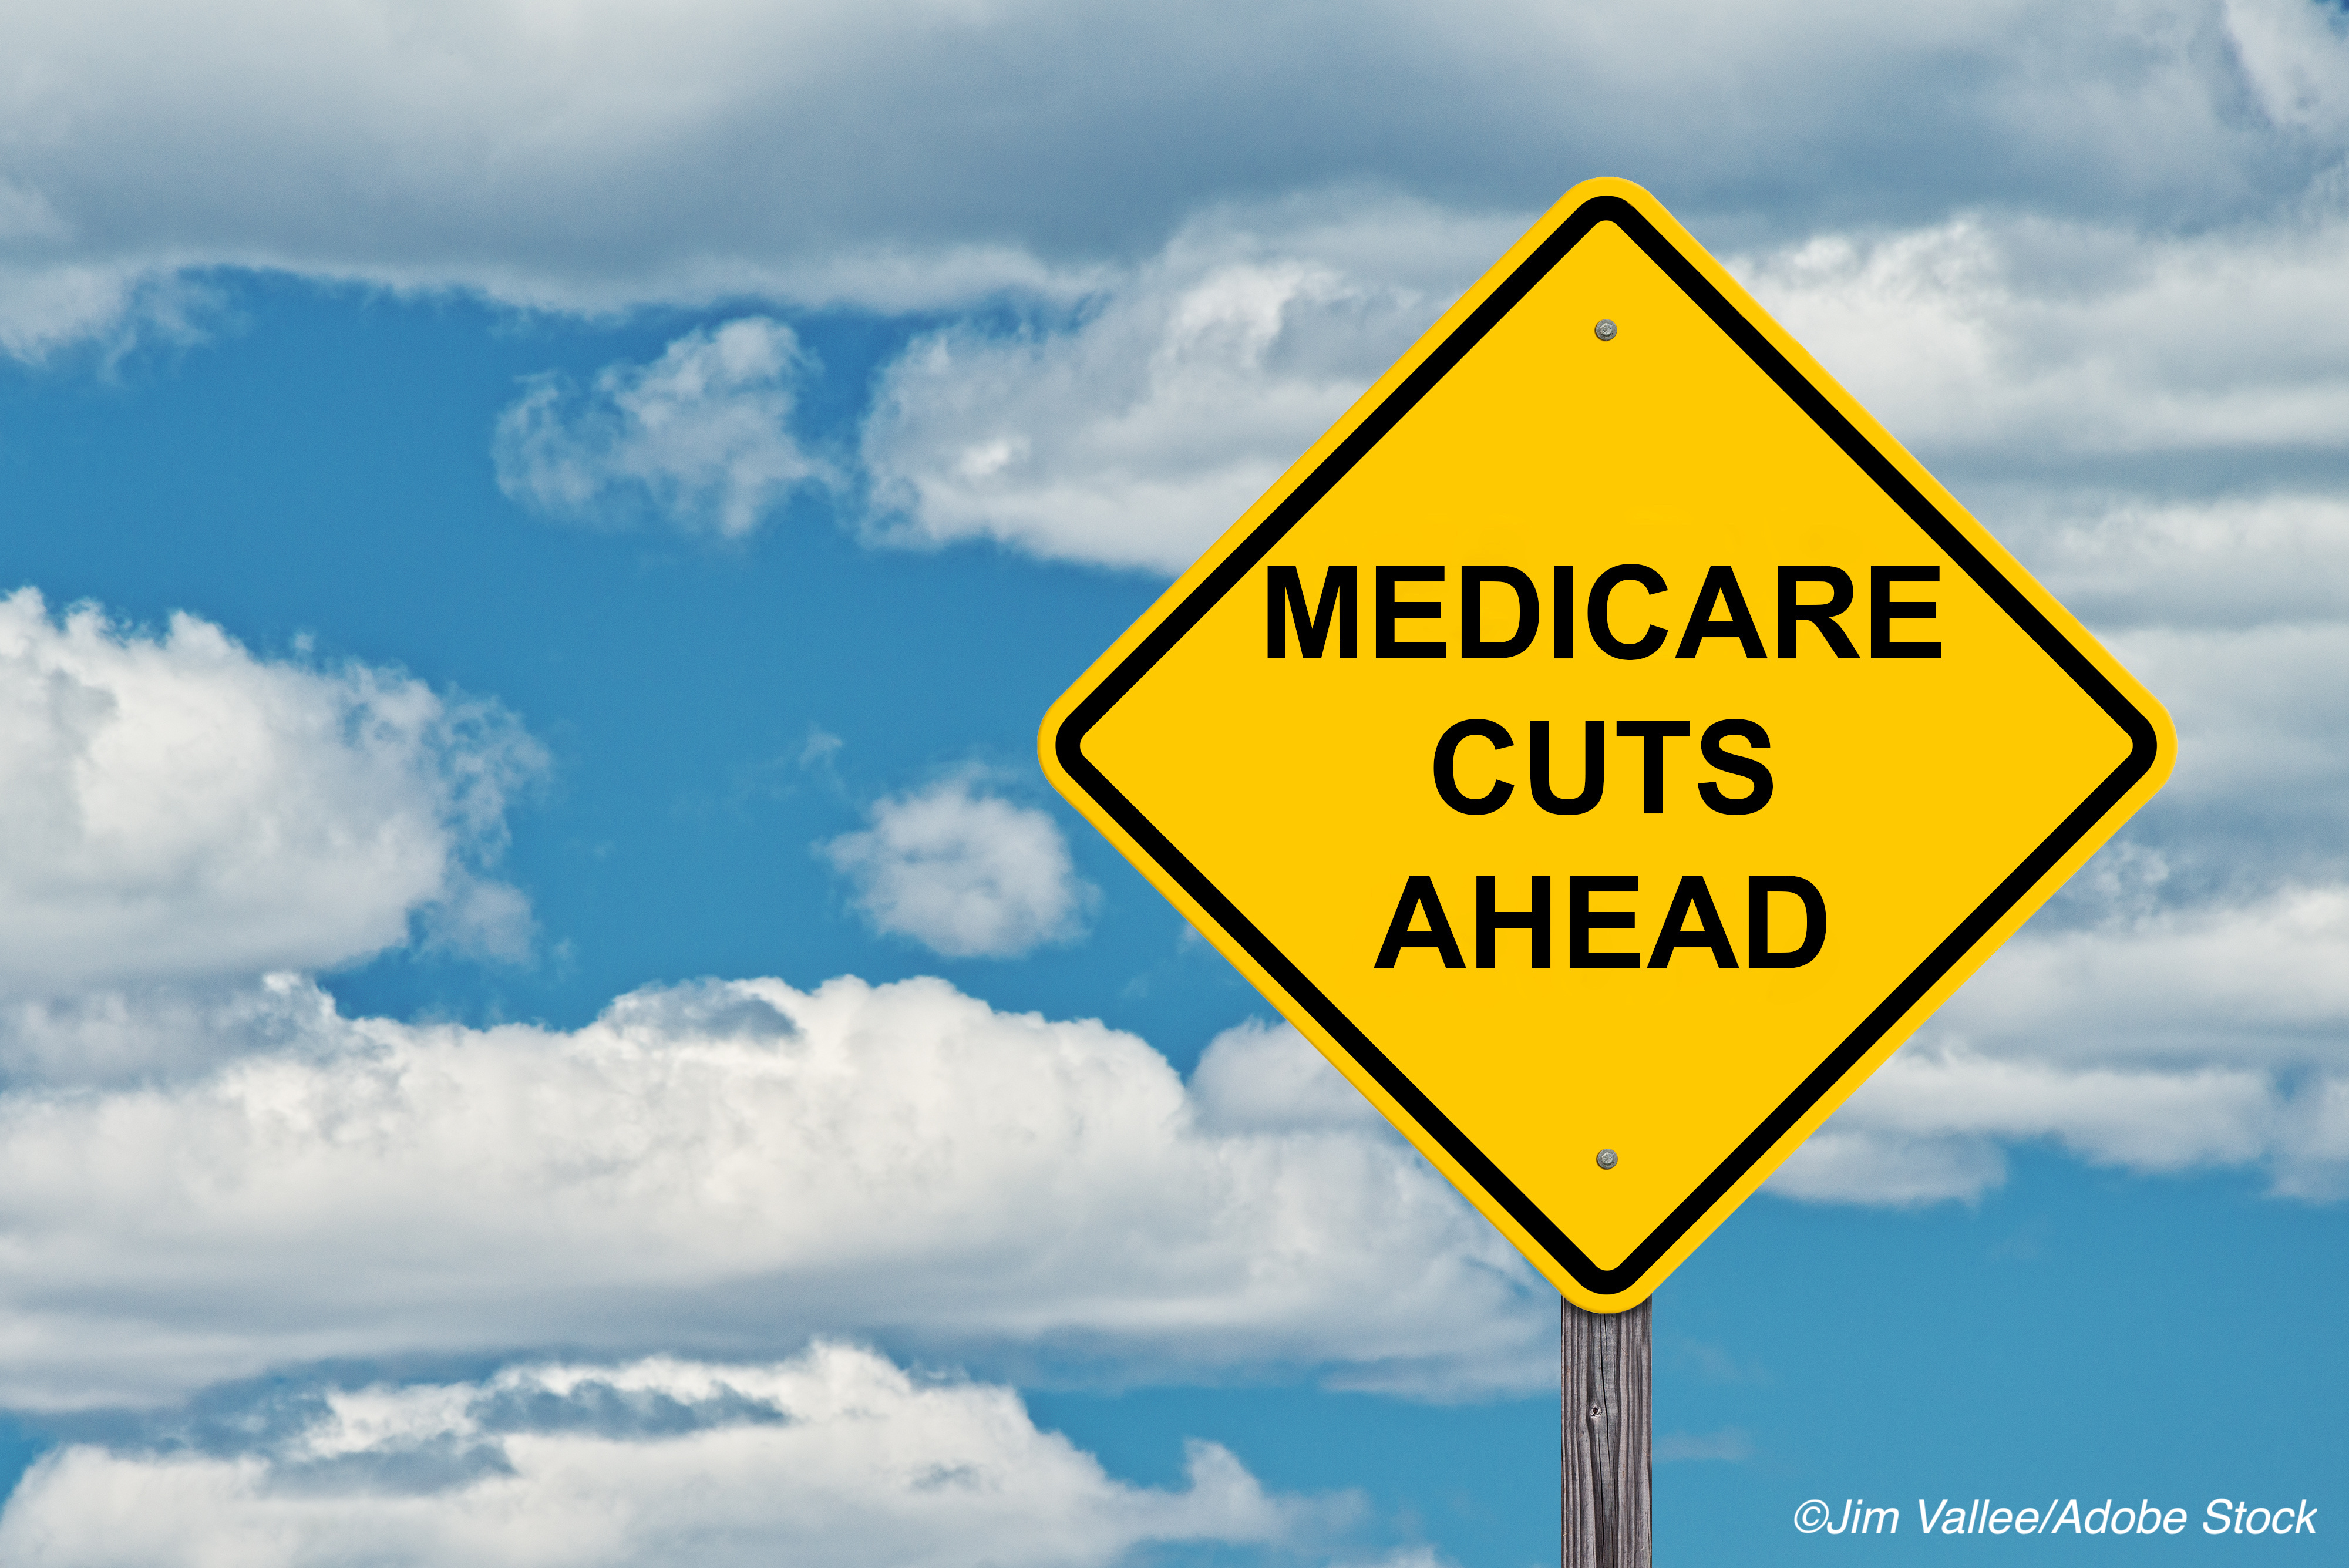 AMA Asks Congress to Block Medicare Sequestration… Again